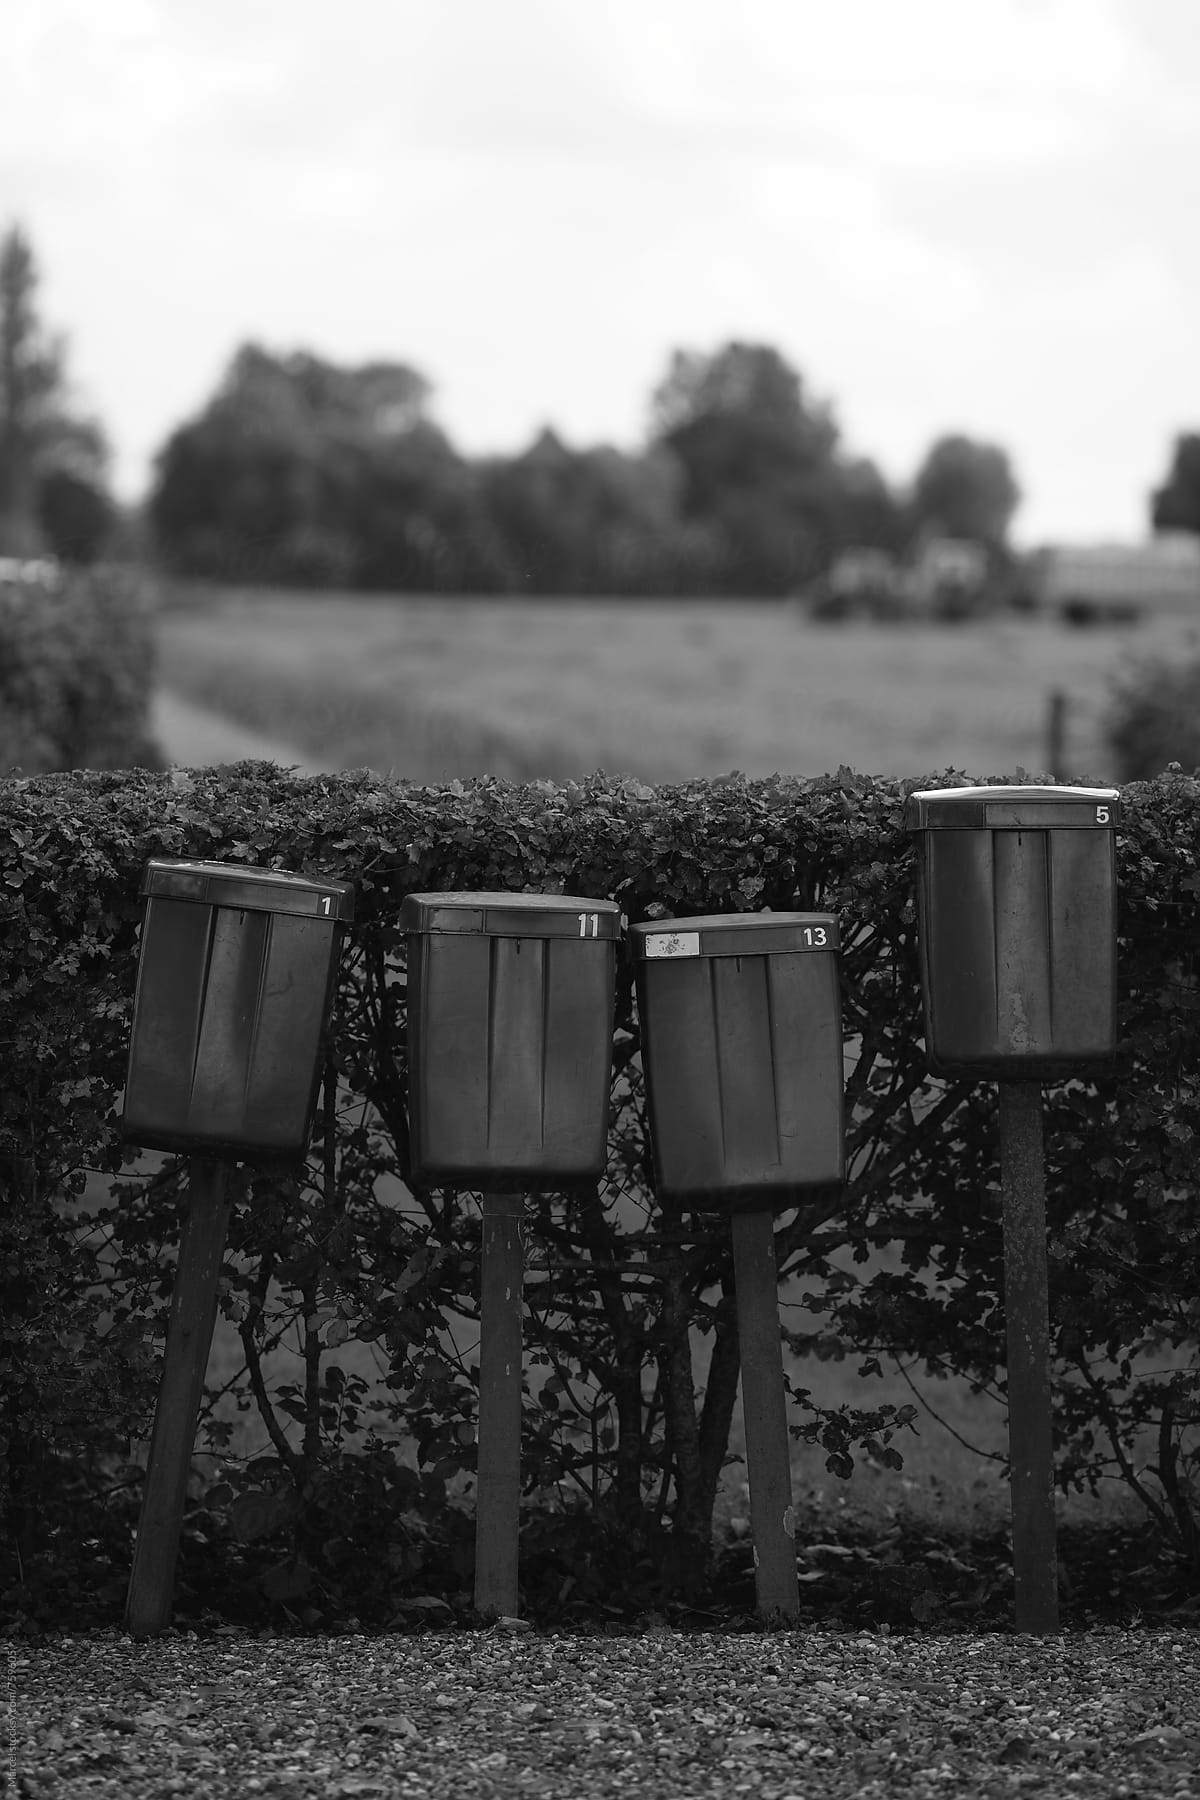 Rural Dutch mailboxes in black and white